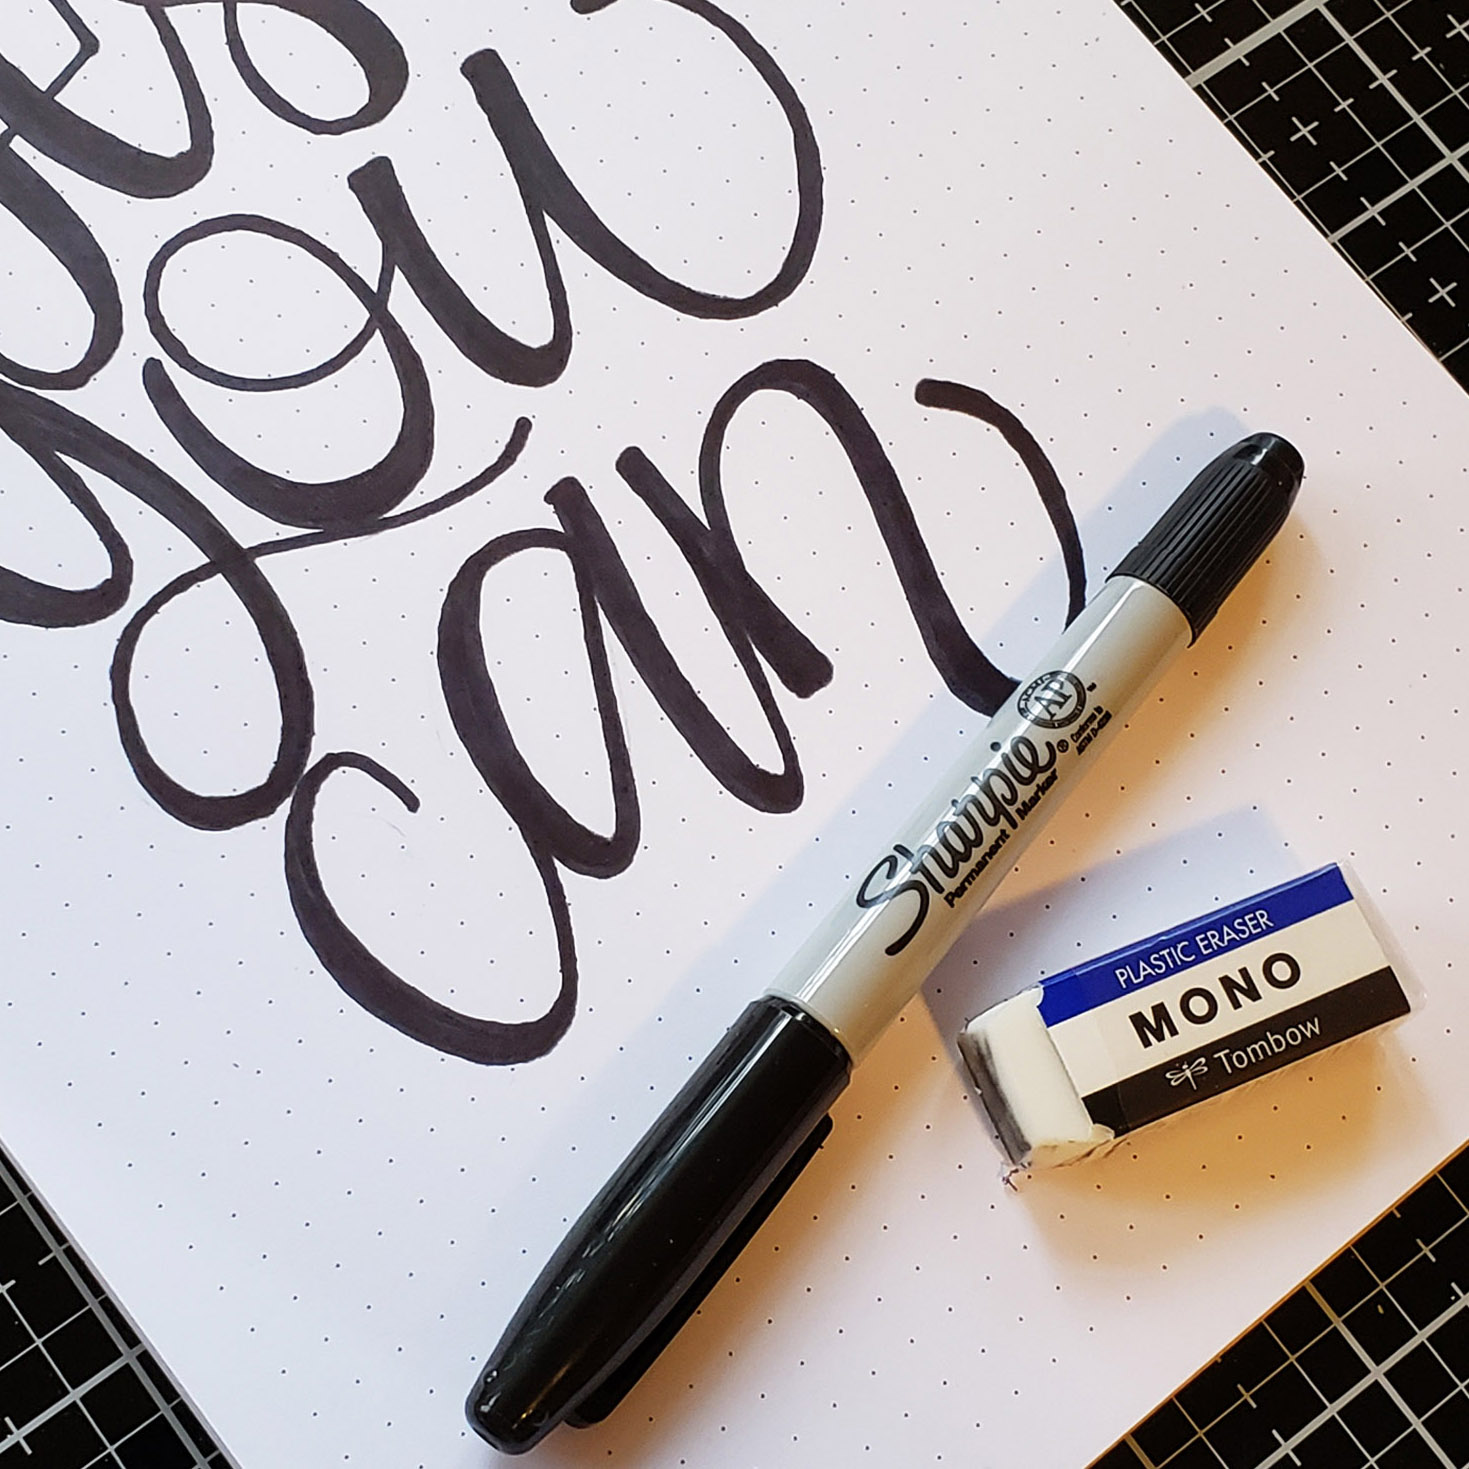 Learn to CreateBrush Lettering with a Simple Sharpie Marker